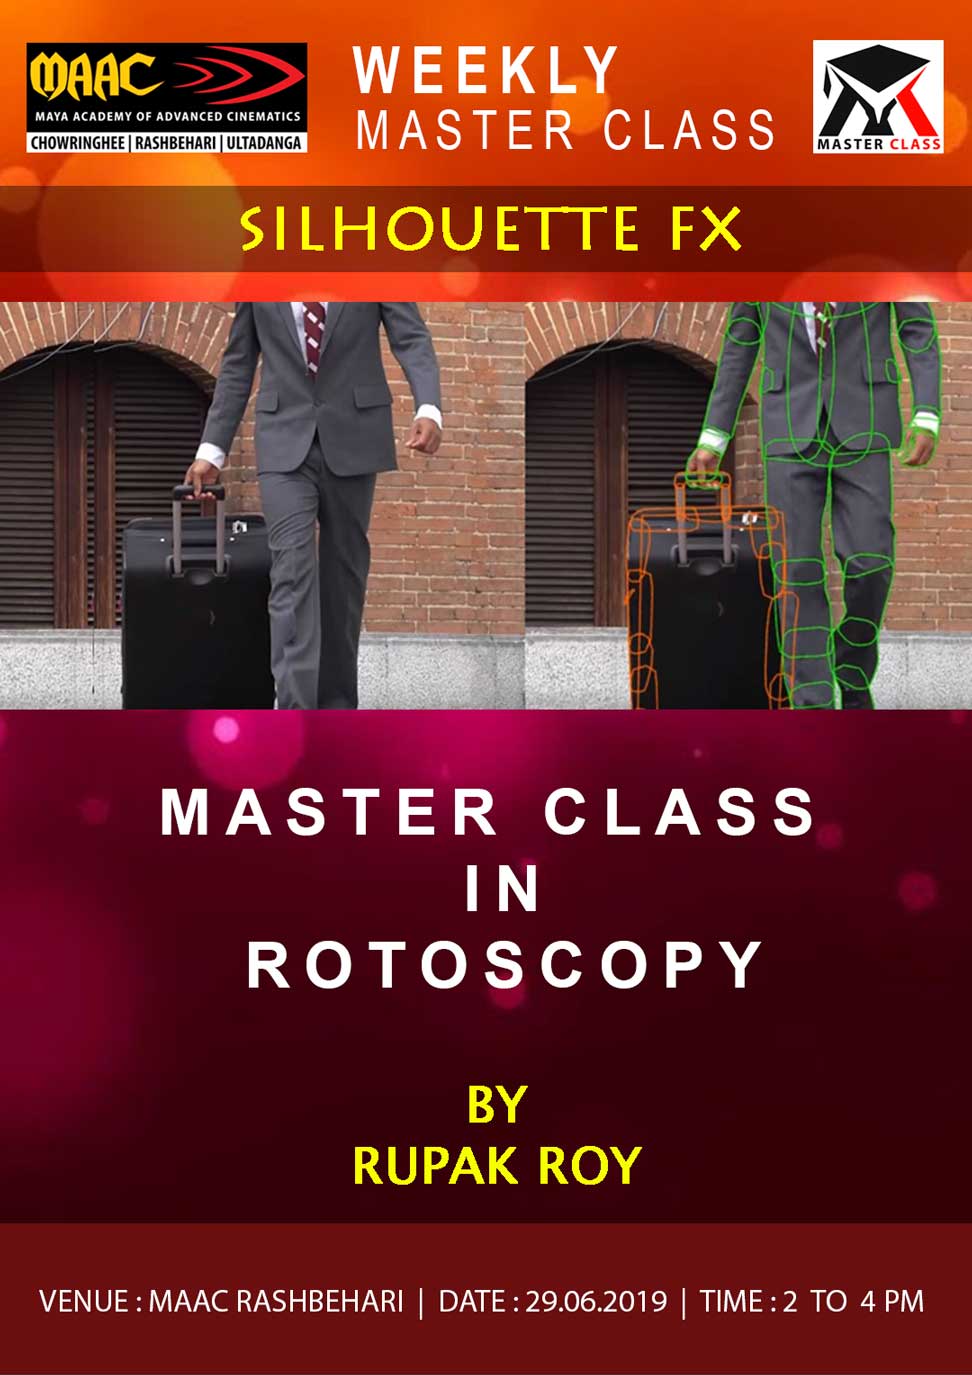 Weekly Master Class on Rotoscopy in Silhouette FX